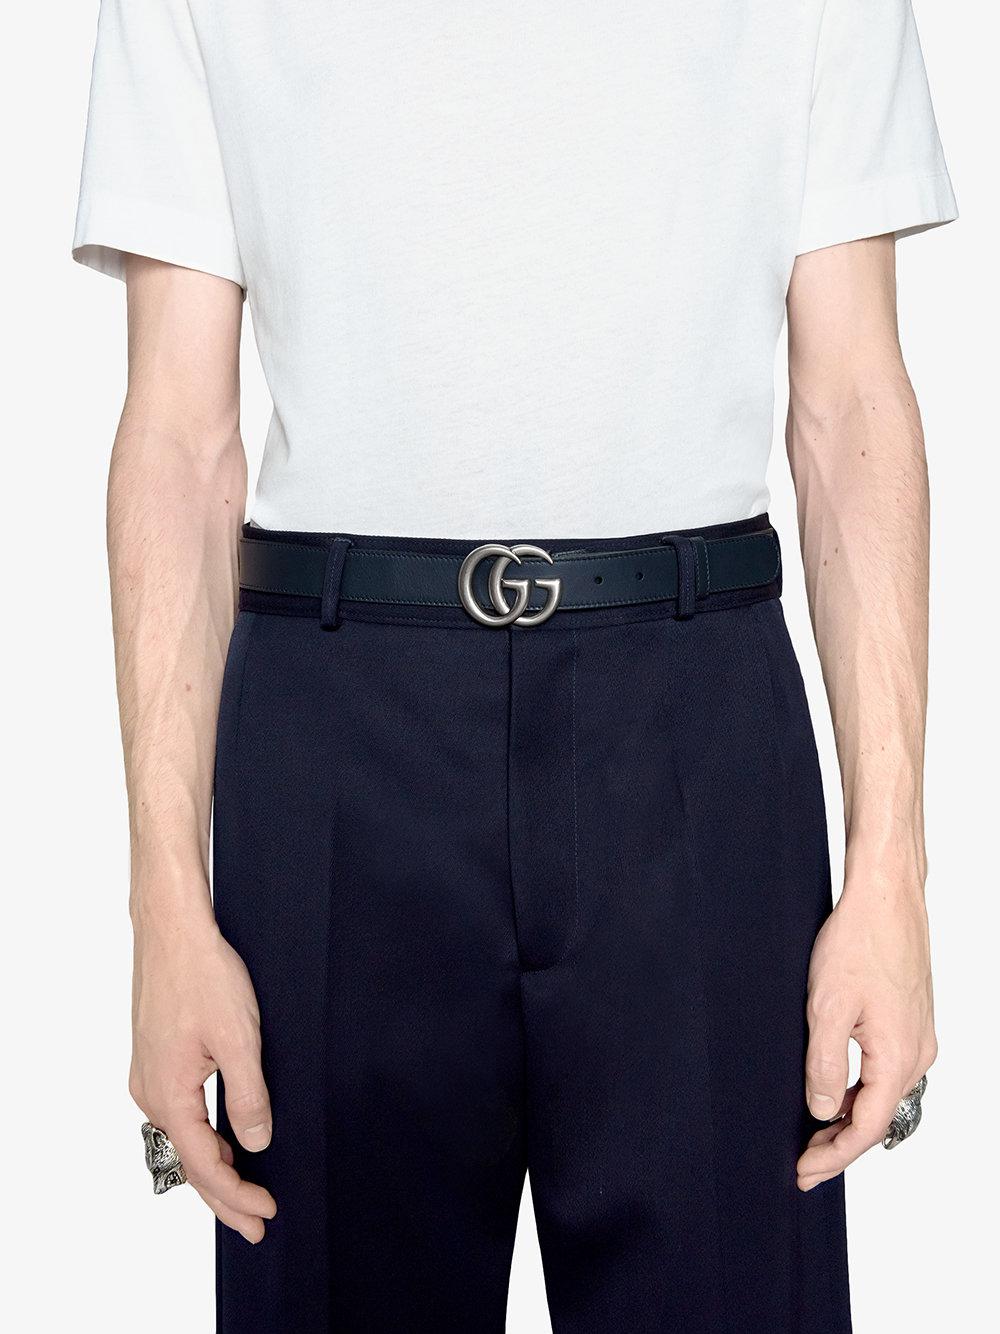 gucci leather belt double g